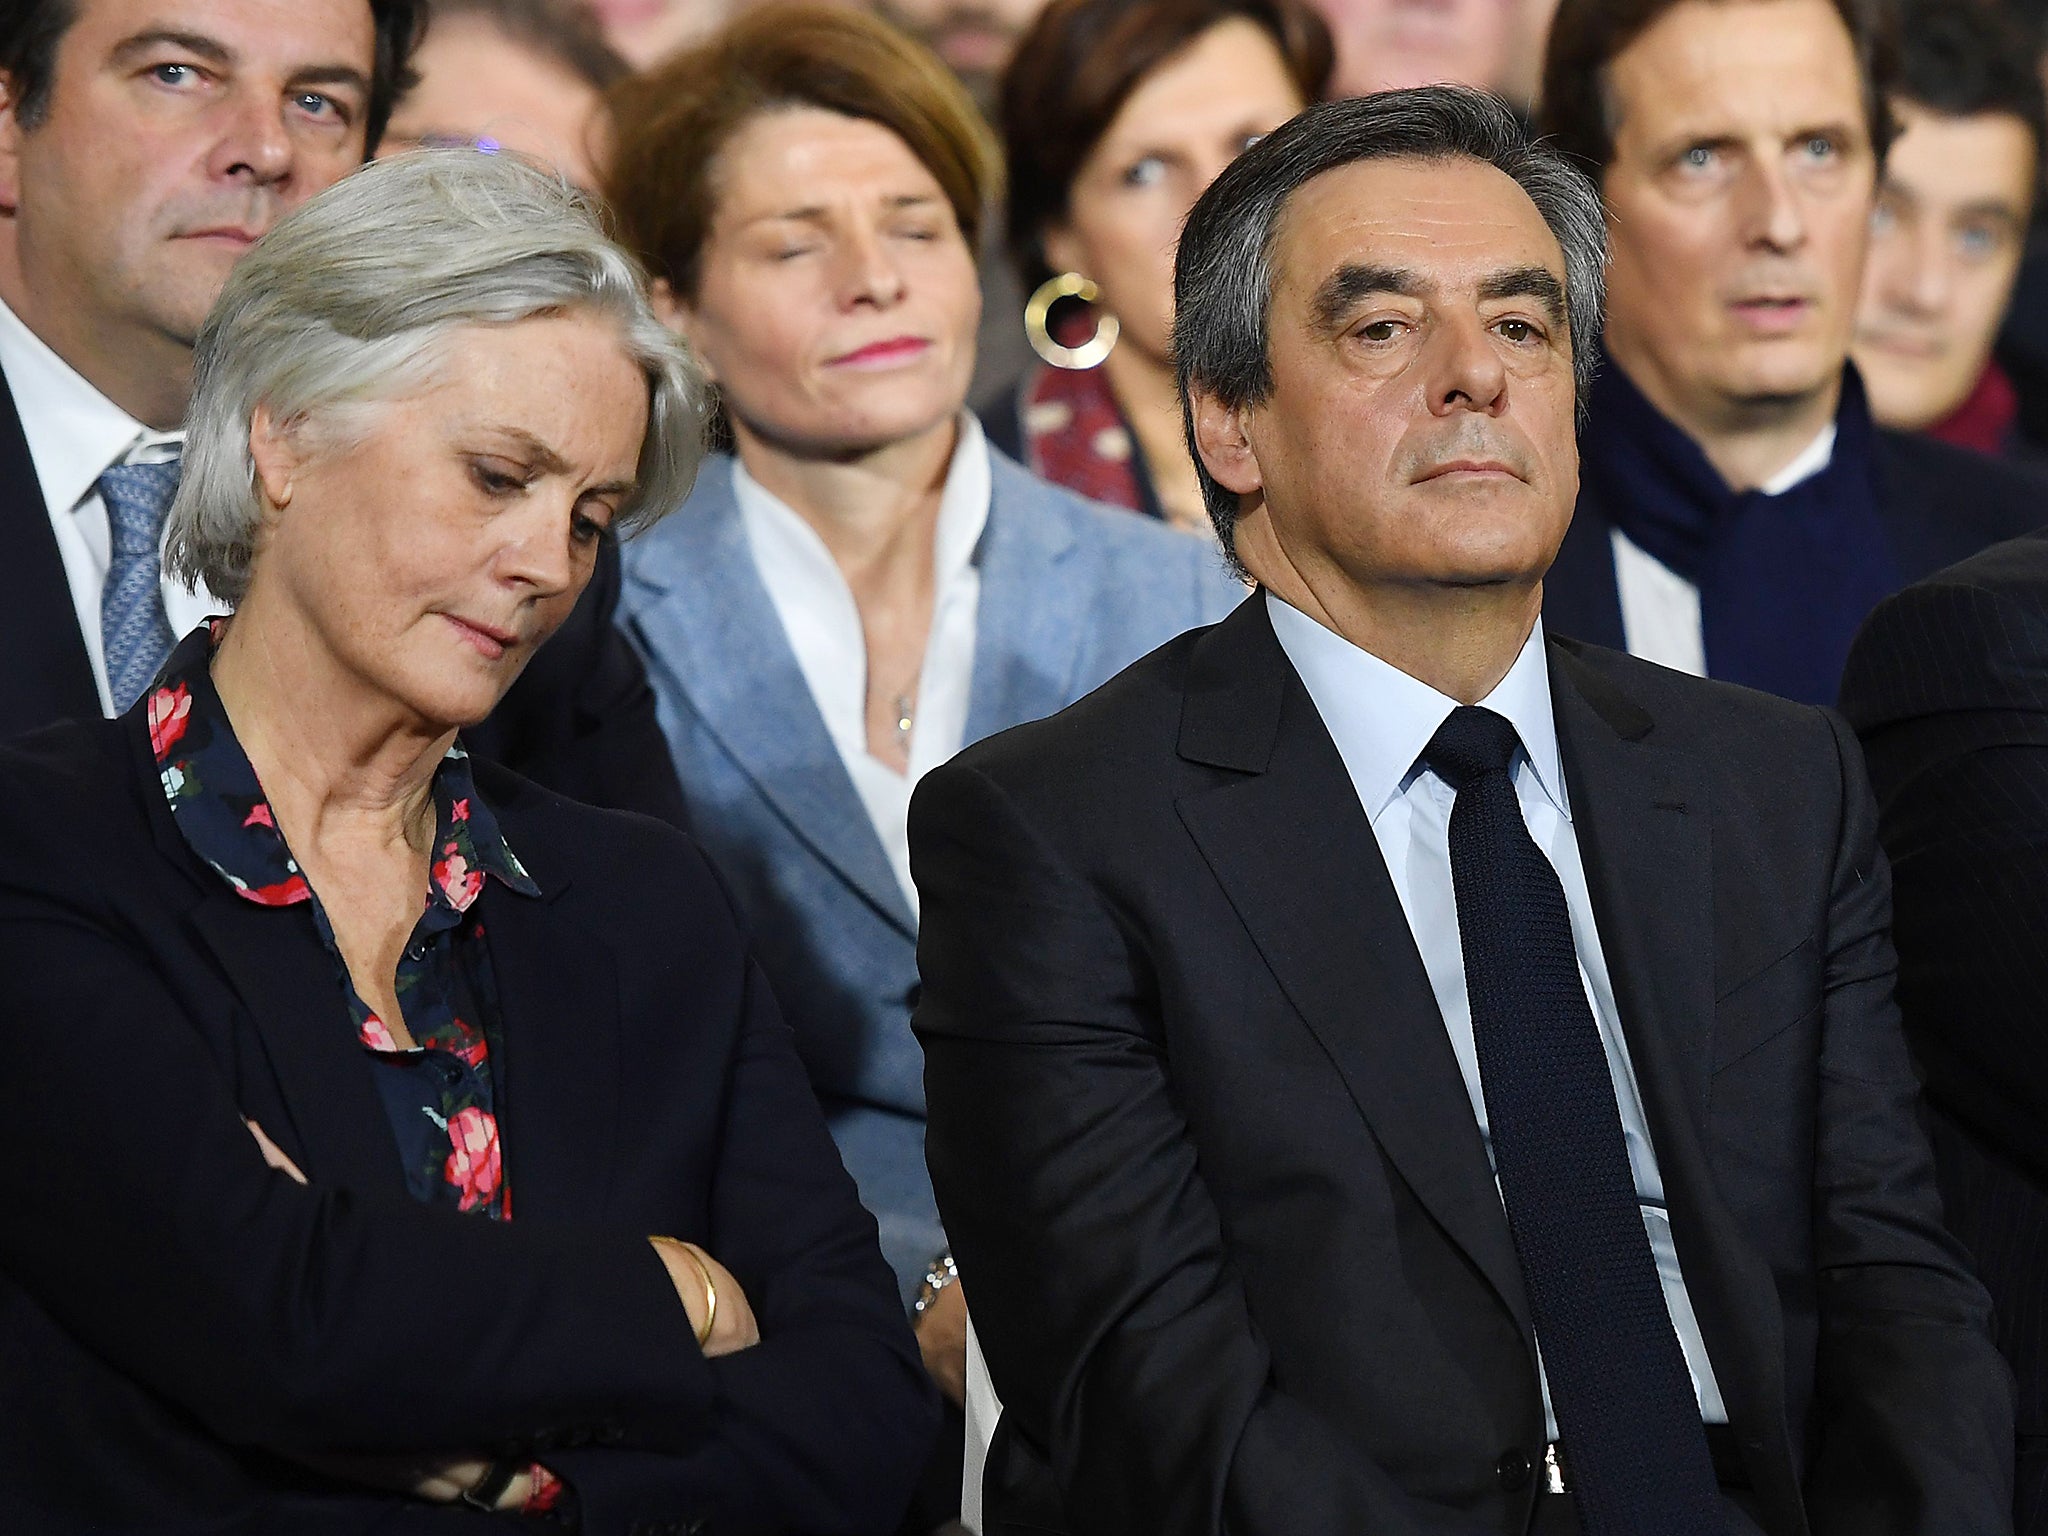 François Fillon and his wife, Penelope, are facing accusations of misusing public funds